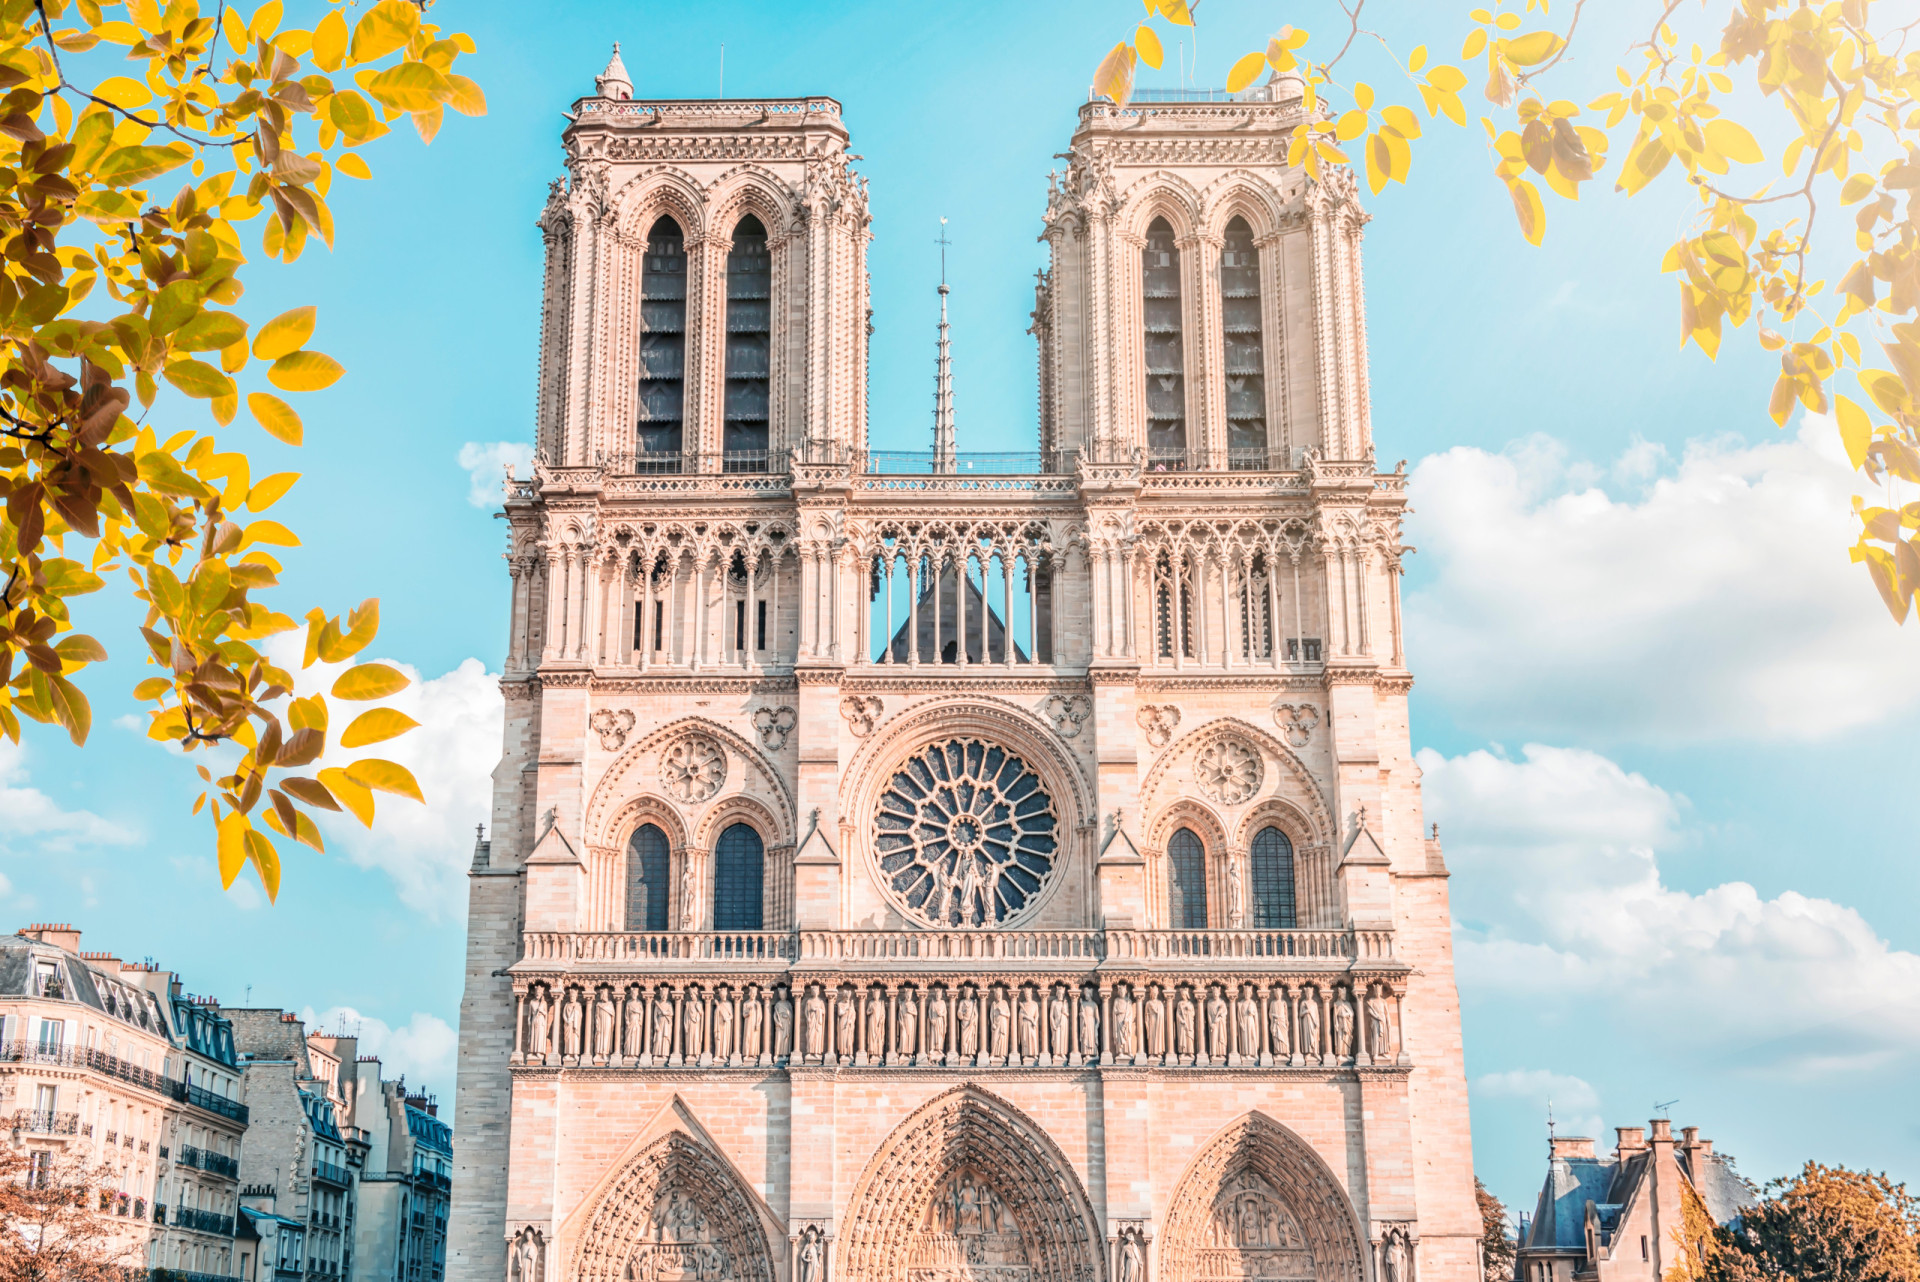 <p>The Notre-Dame Cathedral is an attraction where you'll need to be extra vigilant, as pickpockets frequently target the area.</p><p>You may also like:<a href="https://www.starsinsider.com/n/289785?utm_source=msn.com&utm_medium=display&utm_campaign=referral_description&utm_content=717448en-us"> Ejected: celebs who got kicked off flights</a></p>